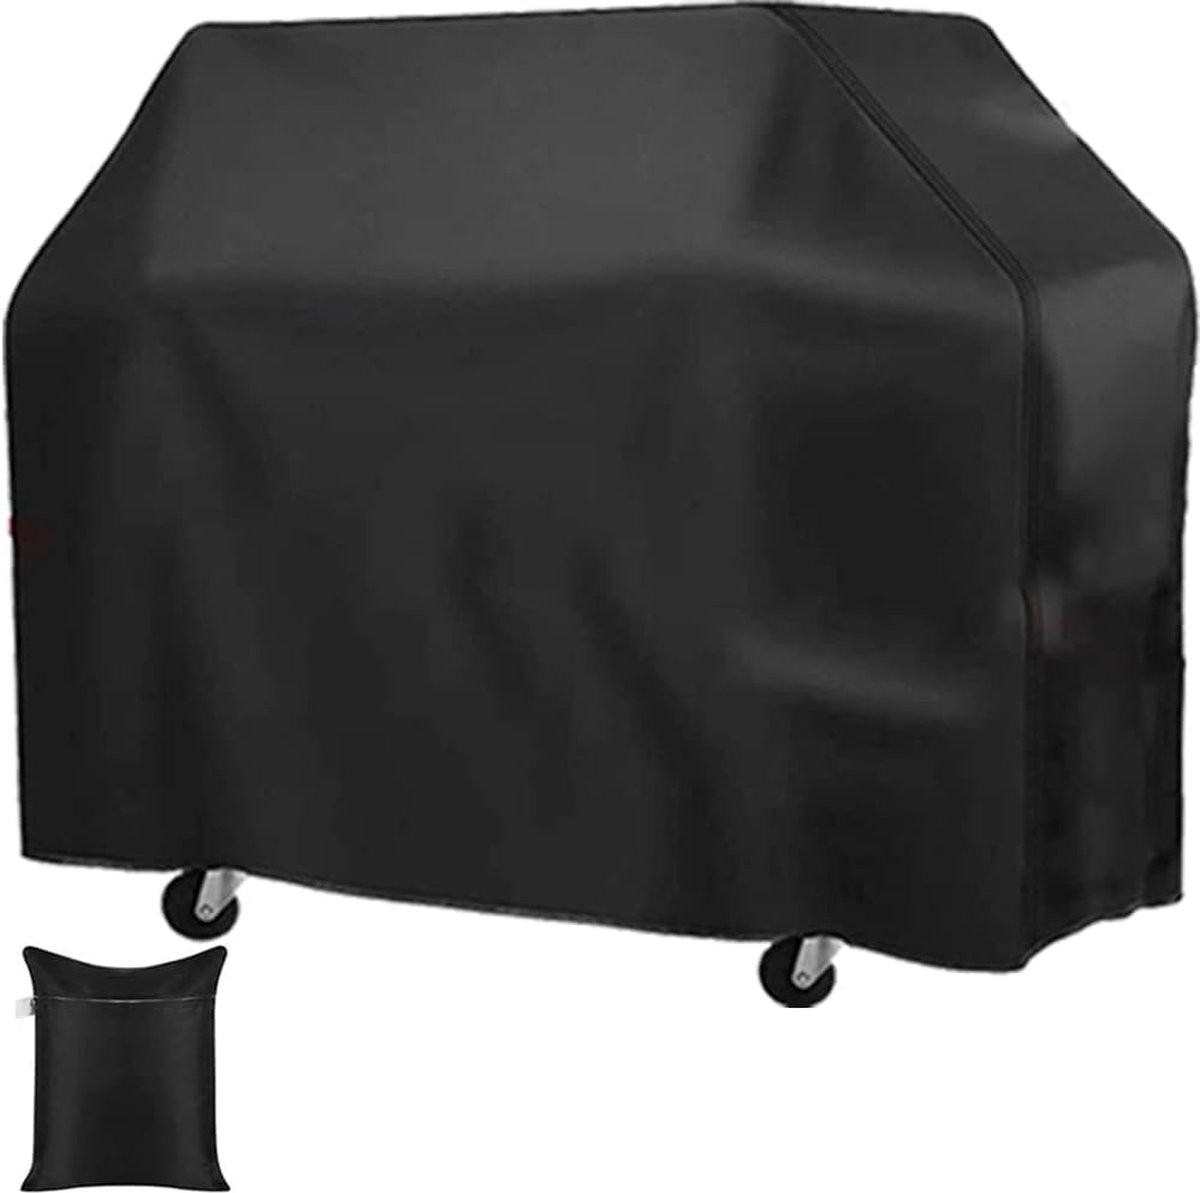 Gas Grill Barbecue Cover Skyour Waterdichte BBQ Gas Grill Roker Cover Weerbestendig UV Heavy Duty Patio Outdoor Gas Barbecue BBQ Grill Covers (S: 31x25,7x39 inch)